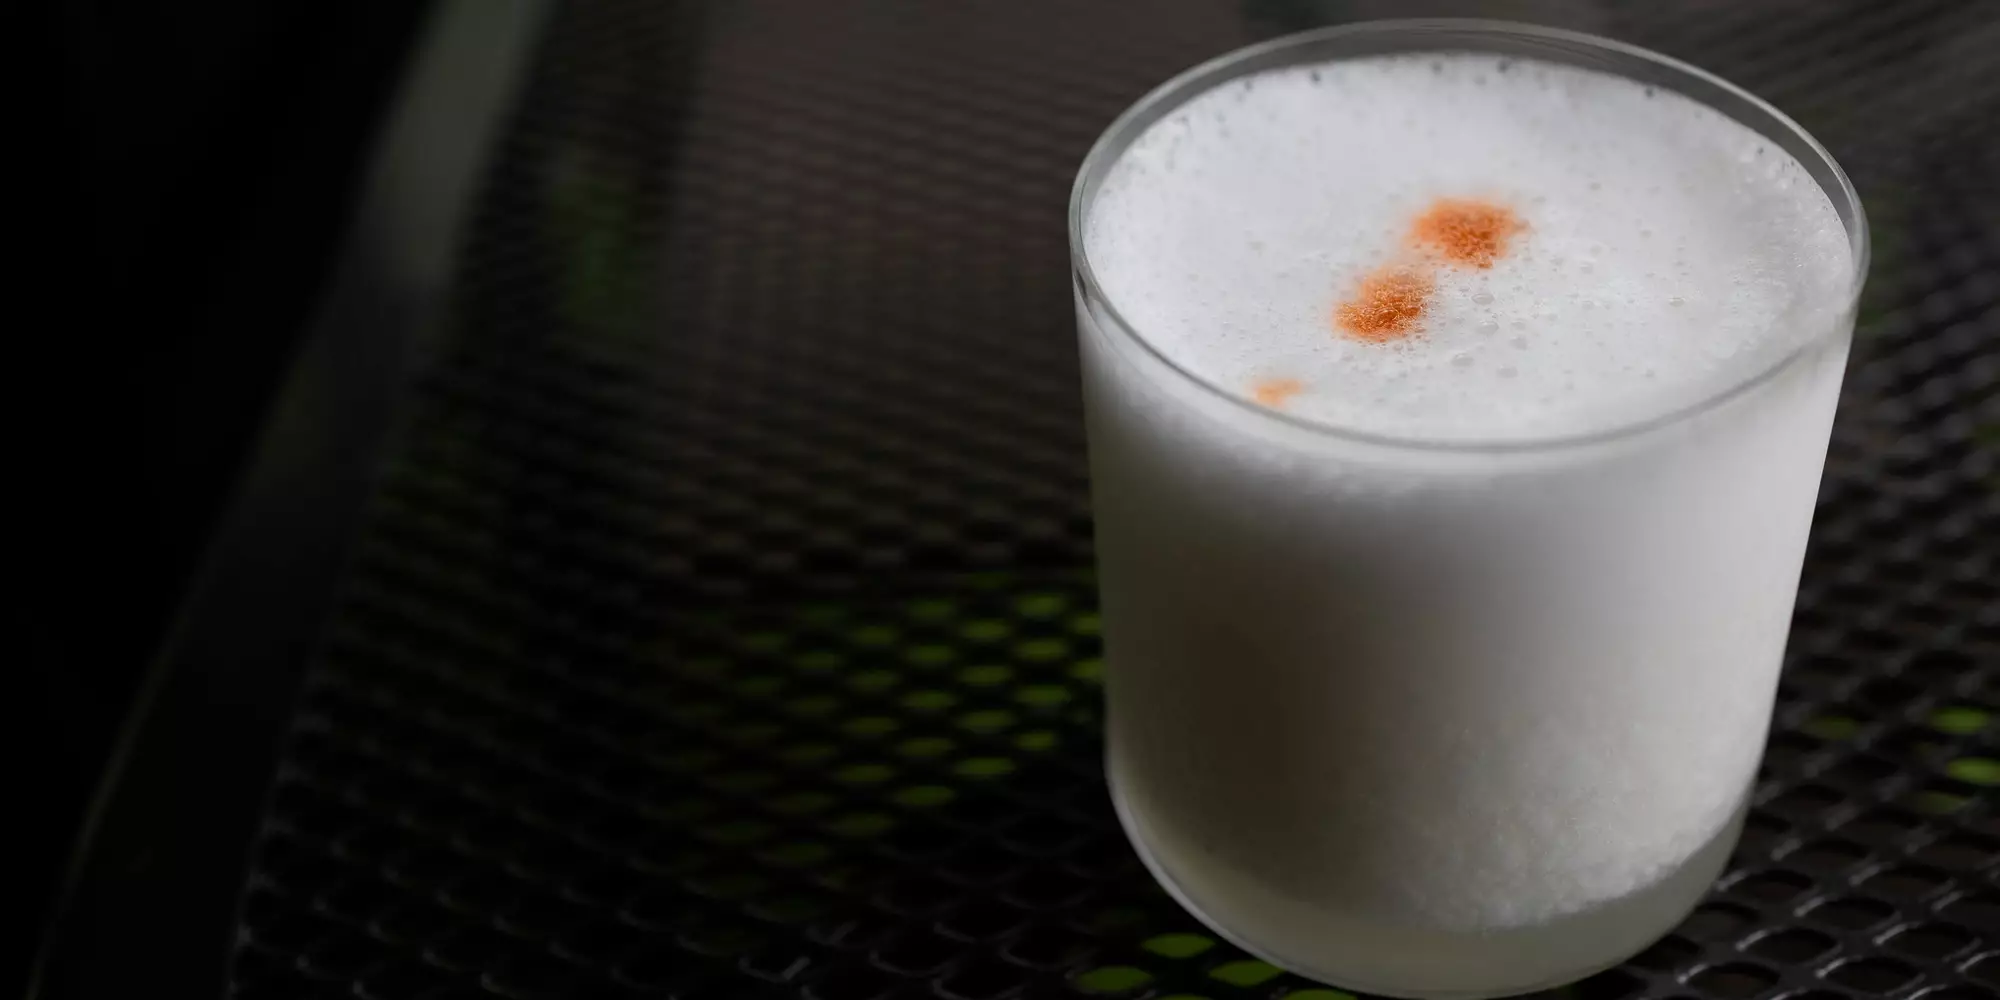 It’s Friday Pisco Sour Time